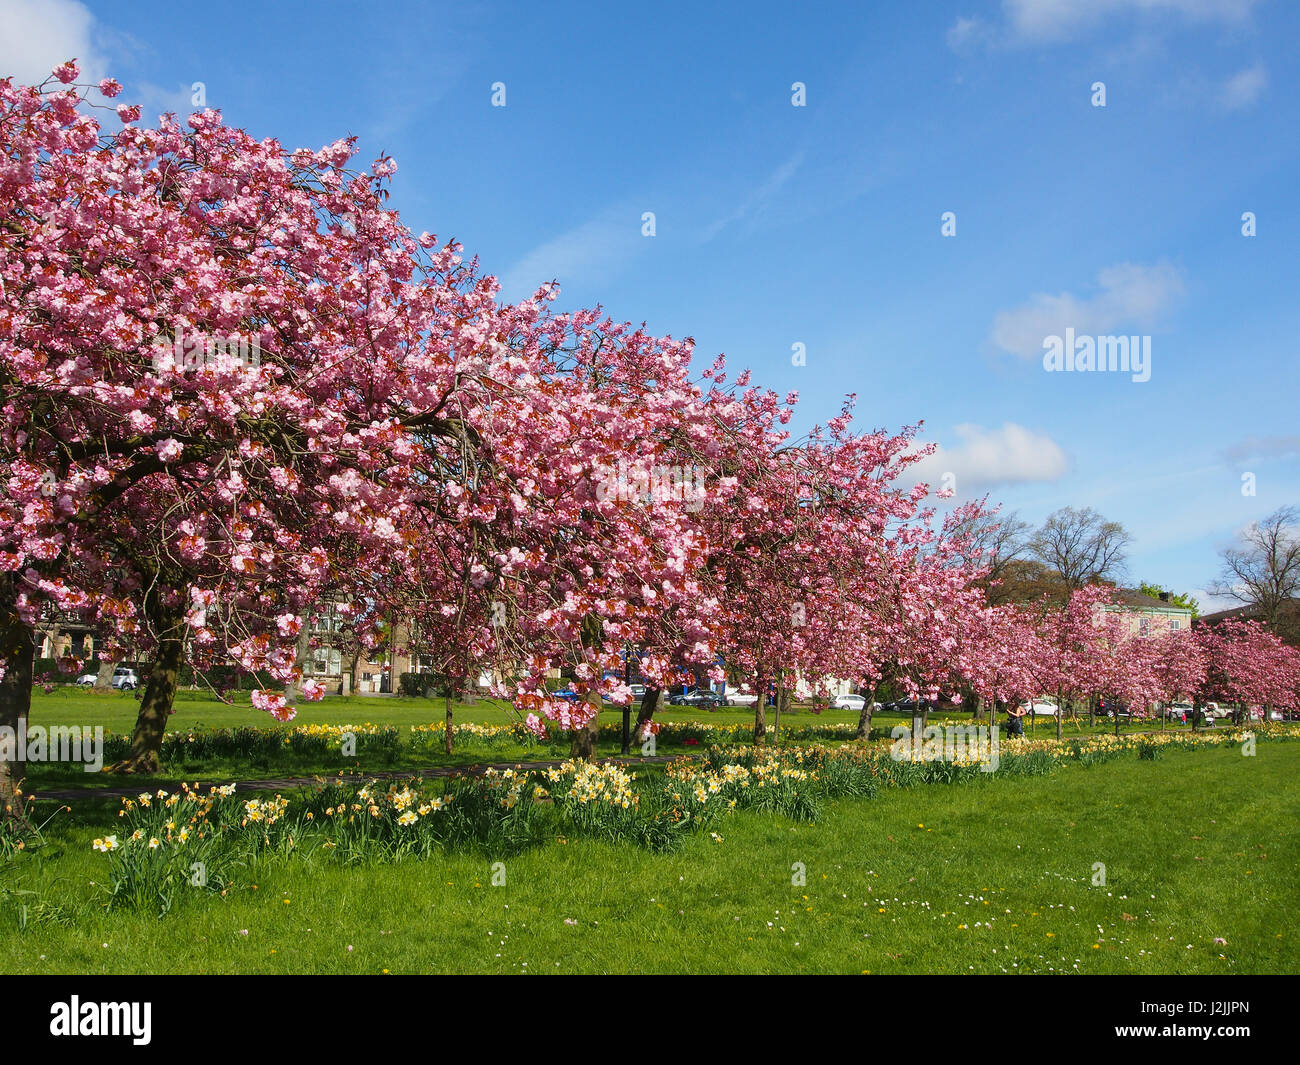 Cherry blossom on the Prunus trees with daffodils under on The Stray in Harrogate, North Yorkshire, England, on a sunny blue sky spring day in April, Stock Photo